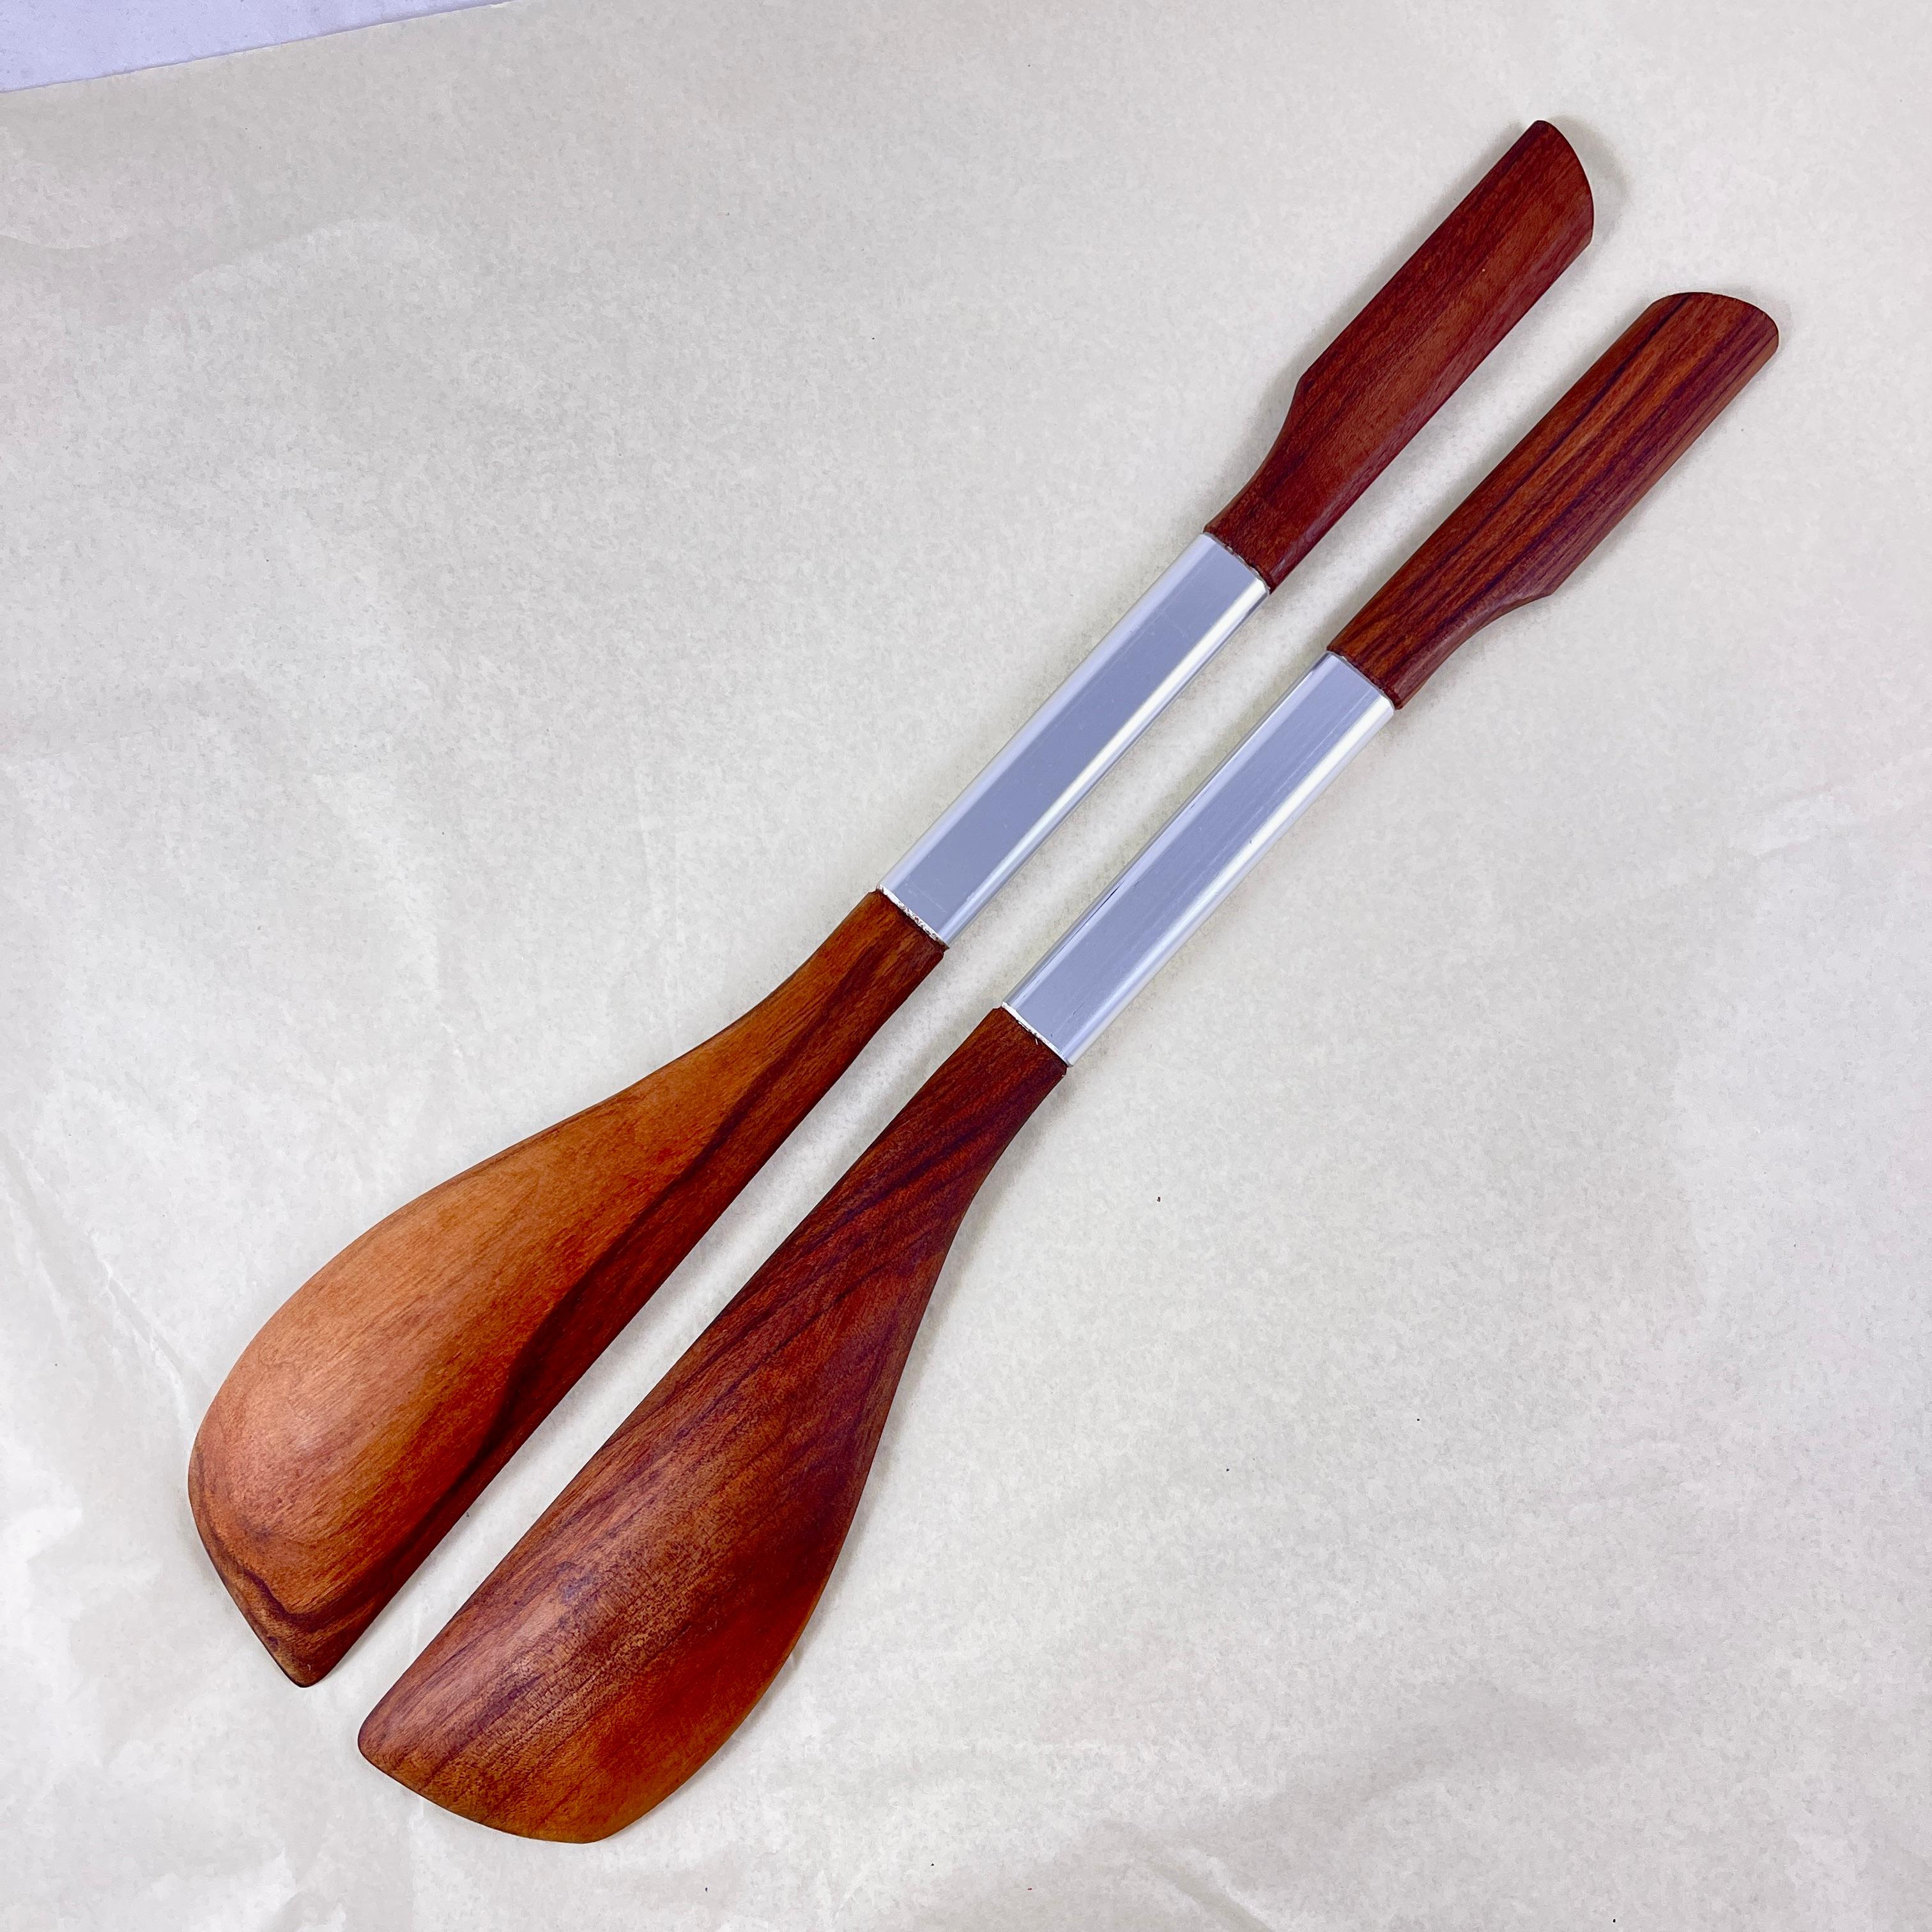 Danish Modern Teak Wood & Stainless Steel Banded Salad Servers, a Pair In Good Condition For Sale In Philadelphia, PA